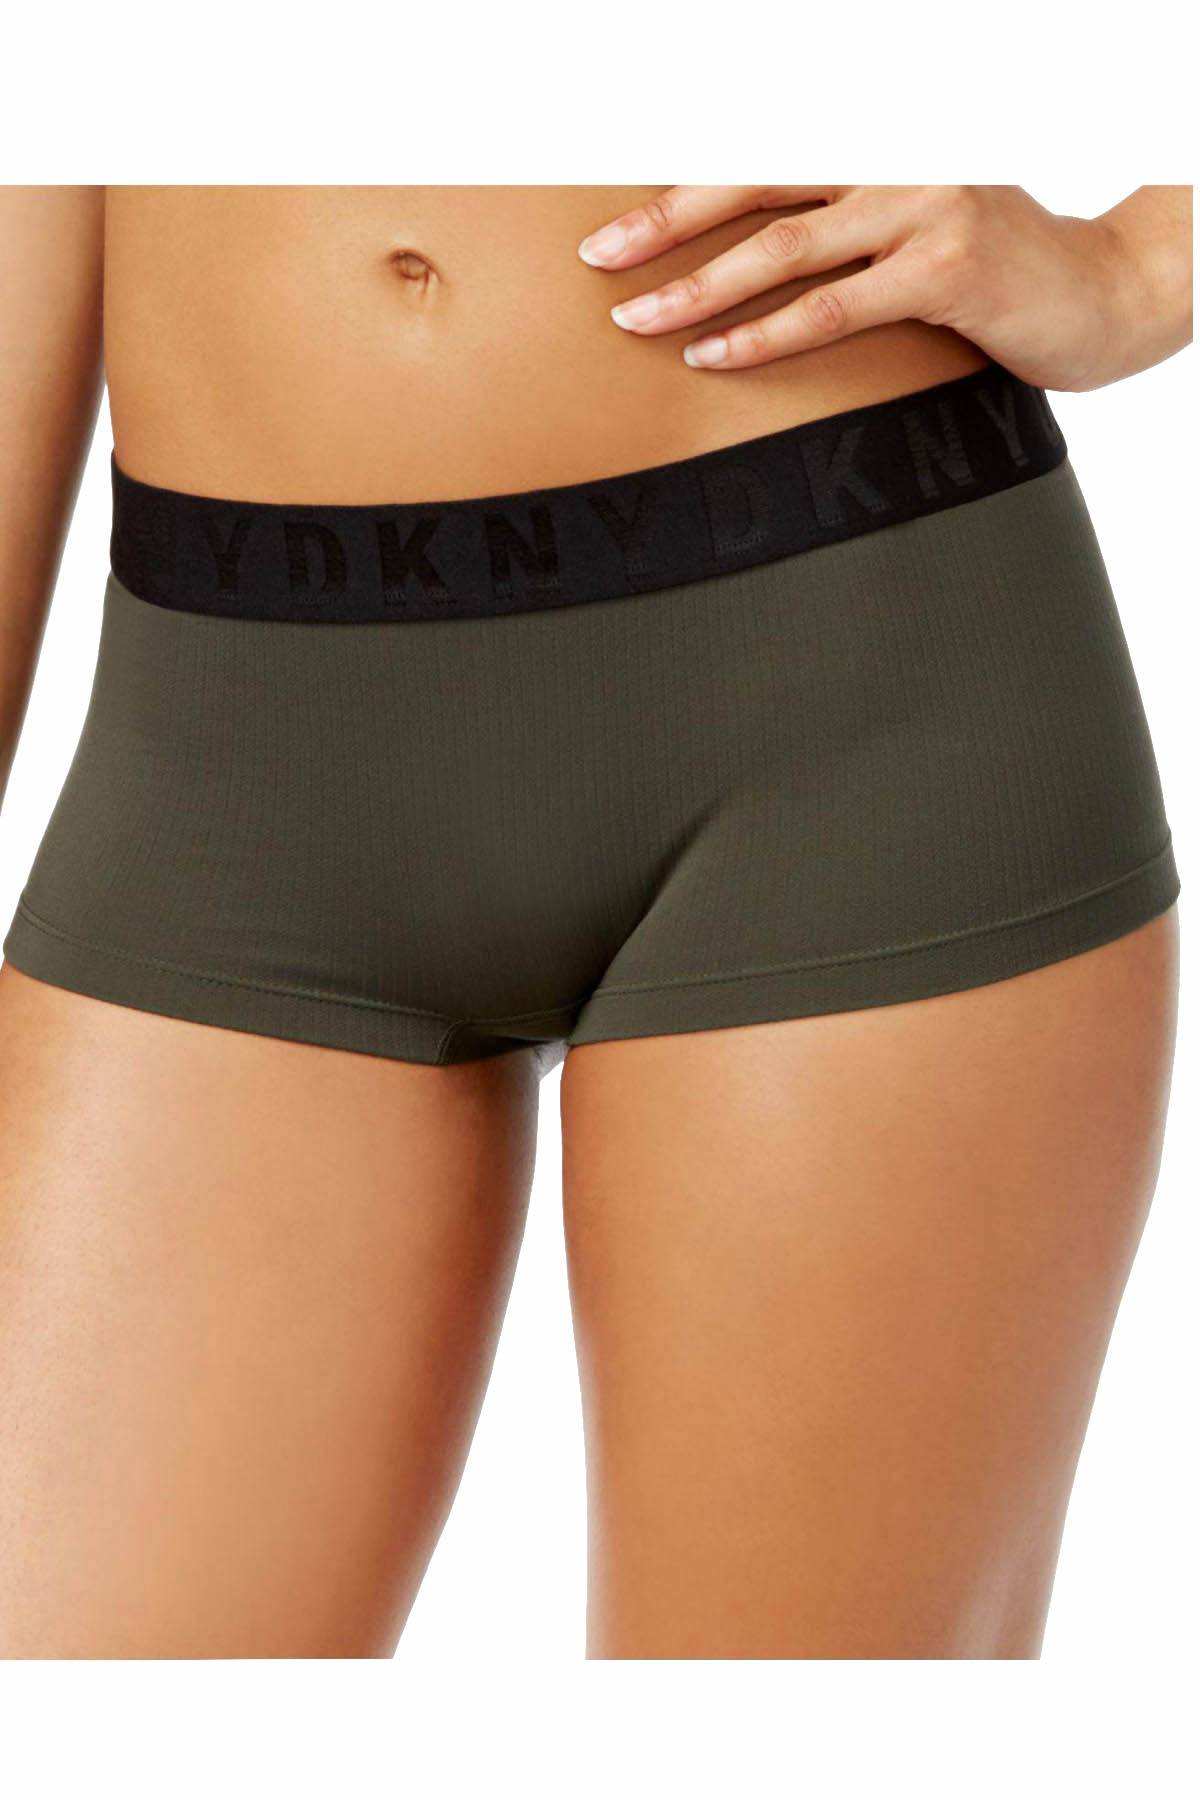 DKNY Military-Green Litewear Seamless Ribbed Hipster